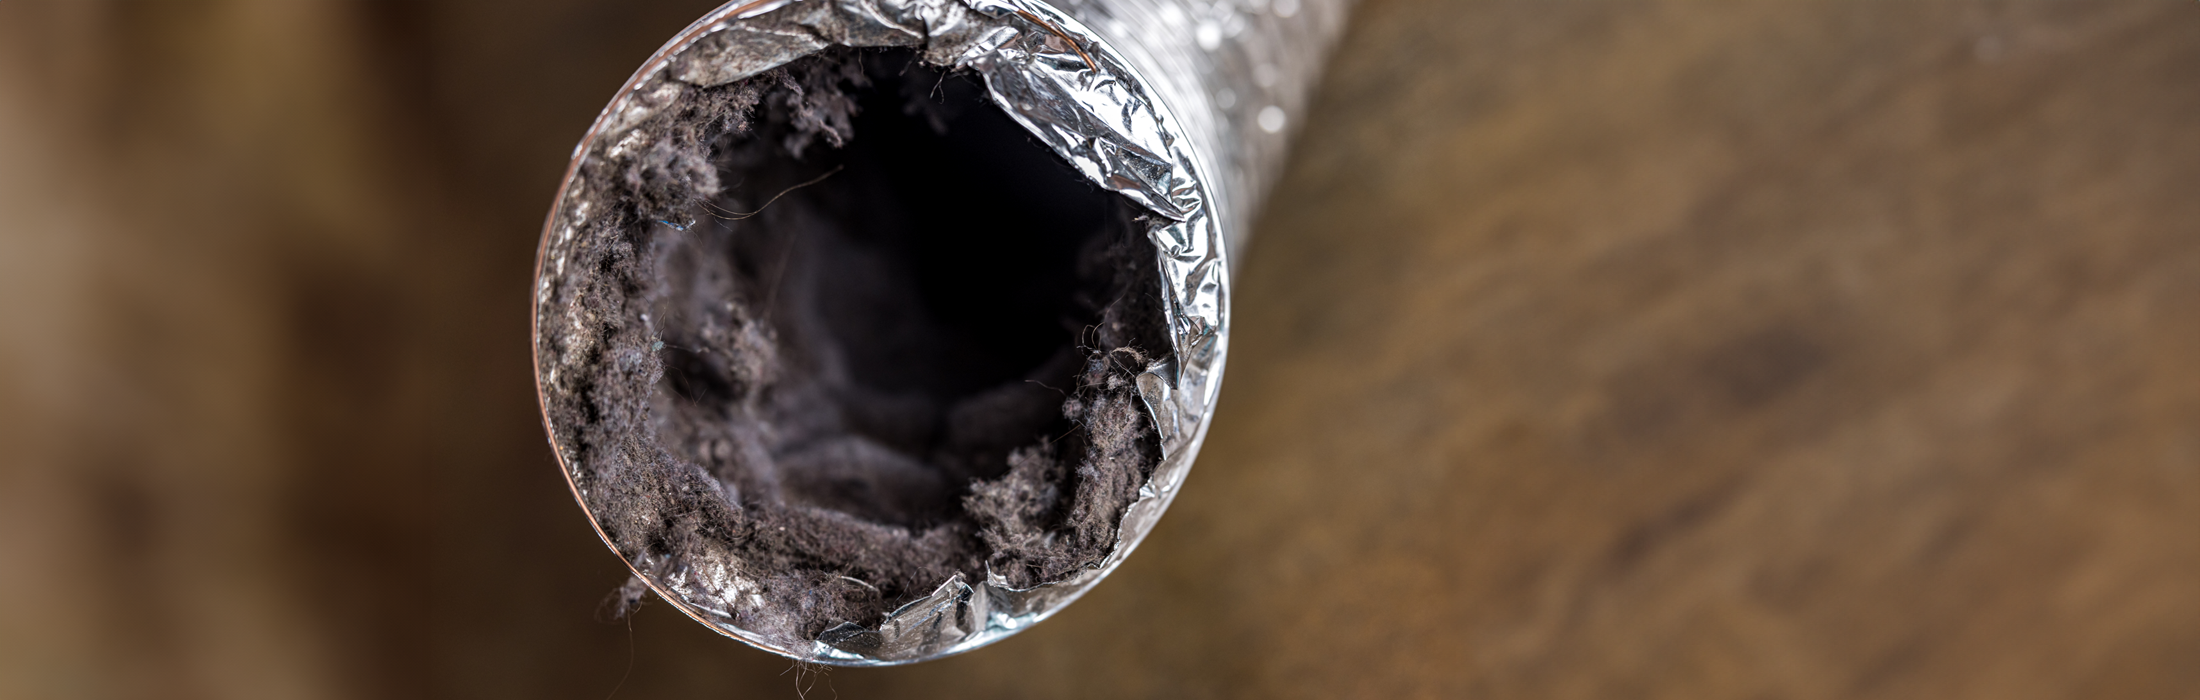 A dirty laundry flexible aluminum dryer vent duct ductwork filled with lint, dust and dirt stock photo